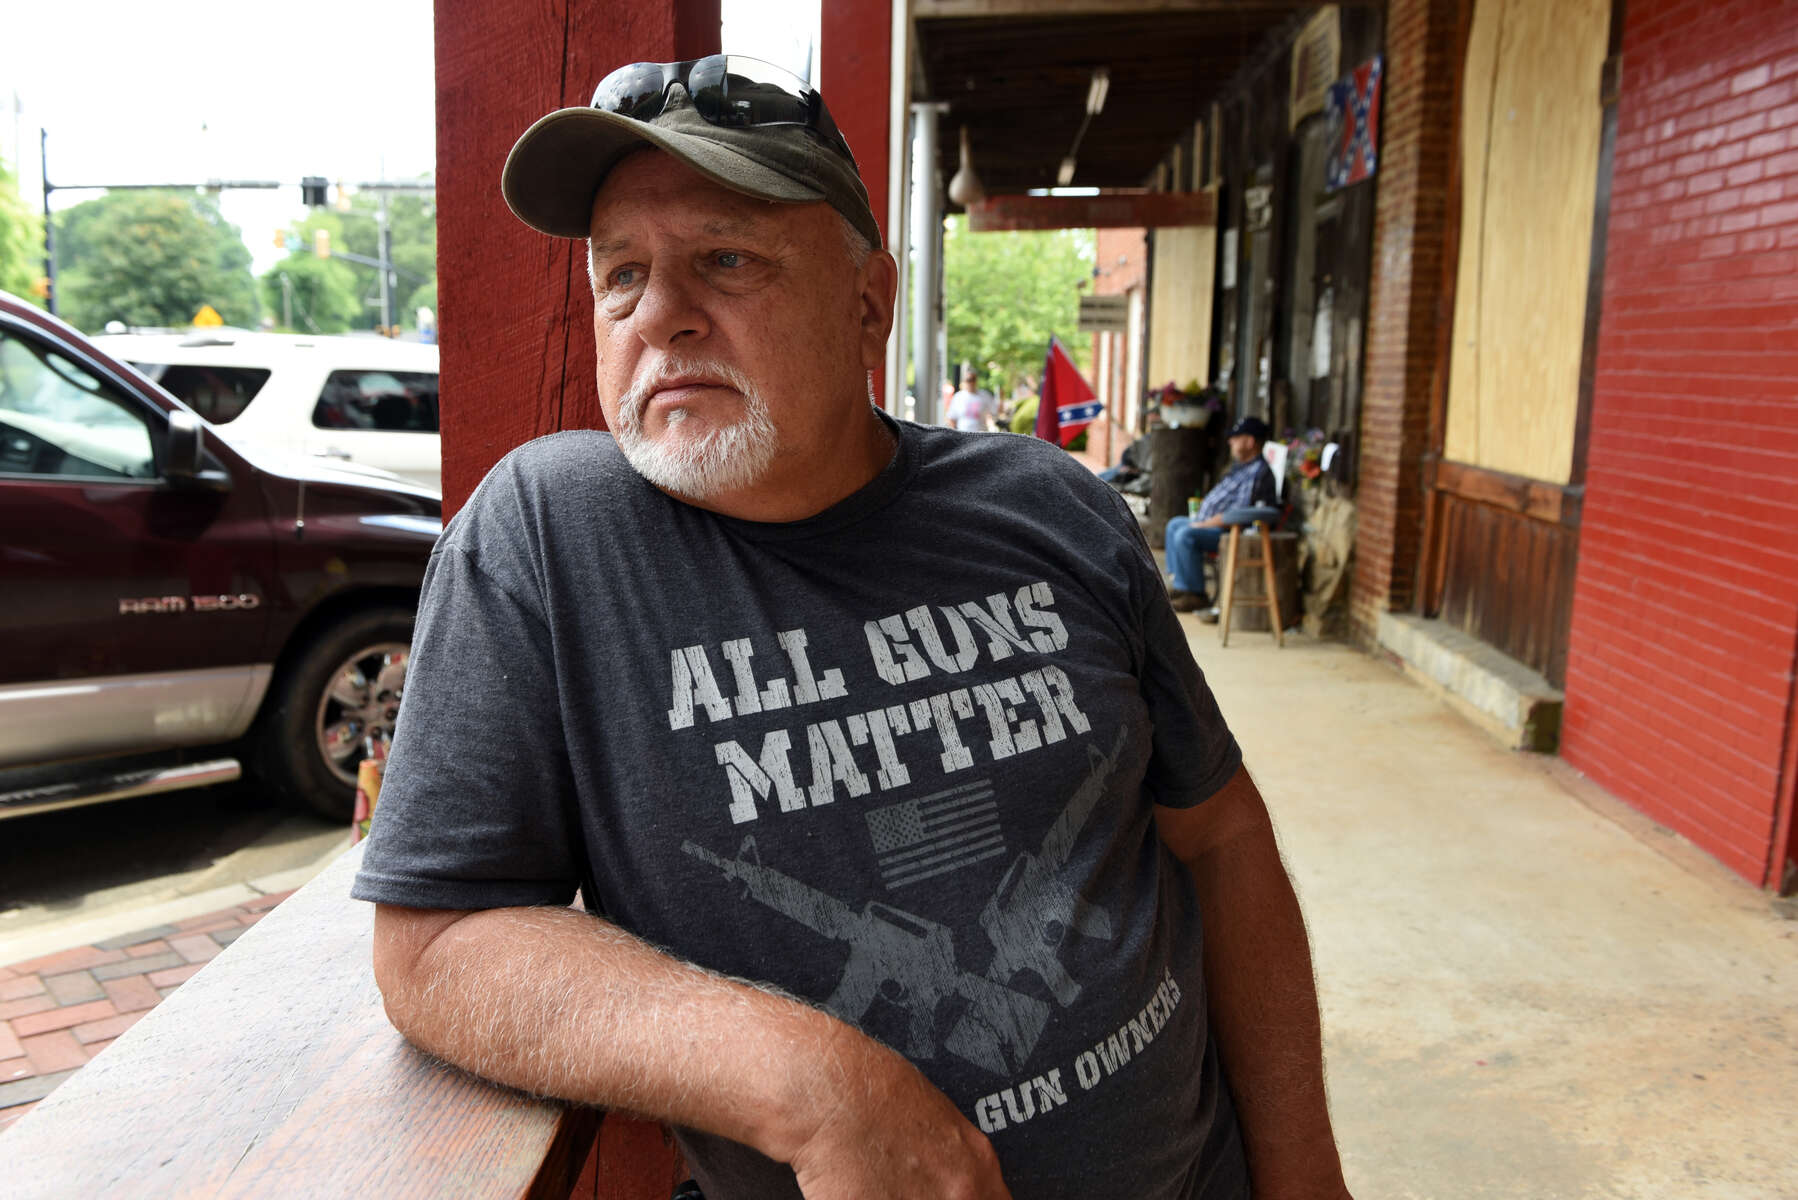 Bill Williams, 64, of Acworth, Ga, is a regular visitor and customer to Dent Myers’ Civil War Surplus shop. Williams is a strong advocate for open carry firearms laws. He was on the watch for protesters who were expected later in the day.